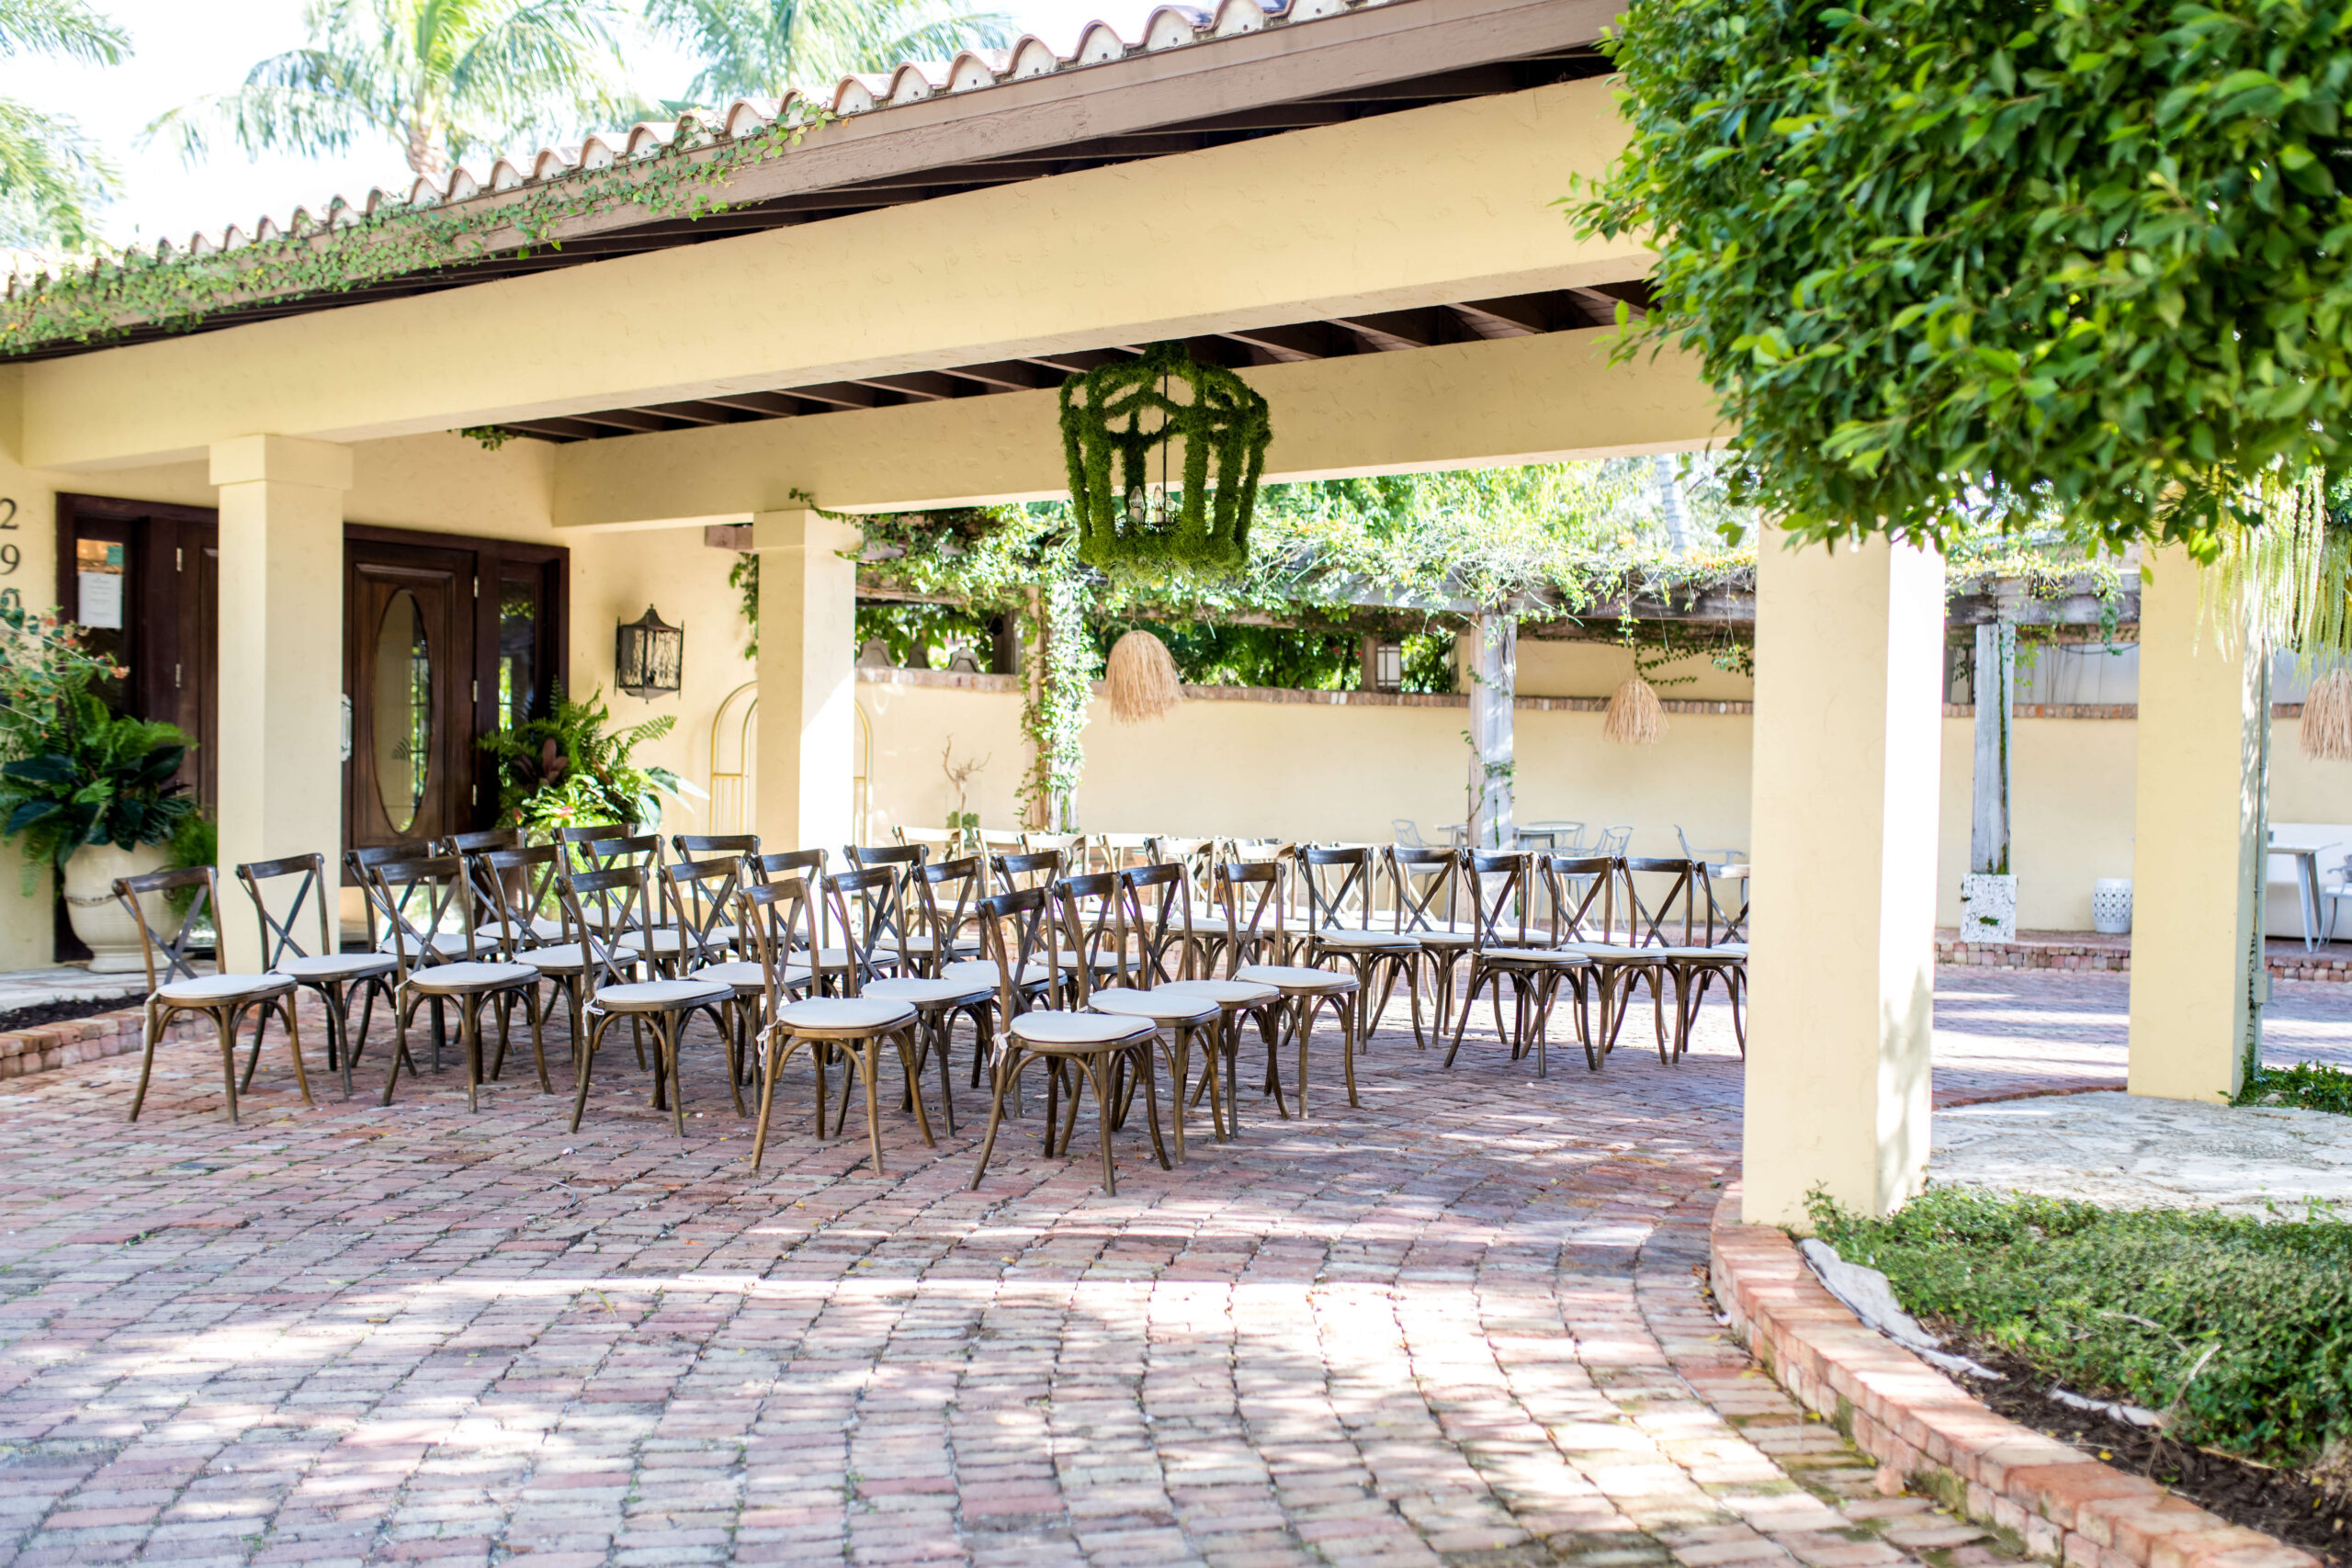 View of the porte cochere cermony set up with wooden chairs at Hotel Escalante